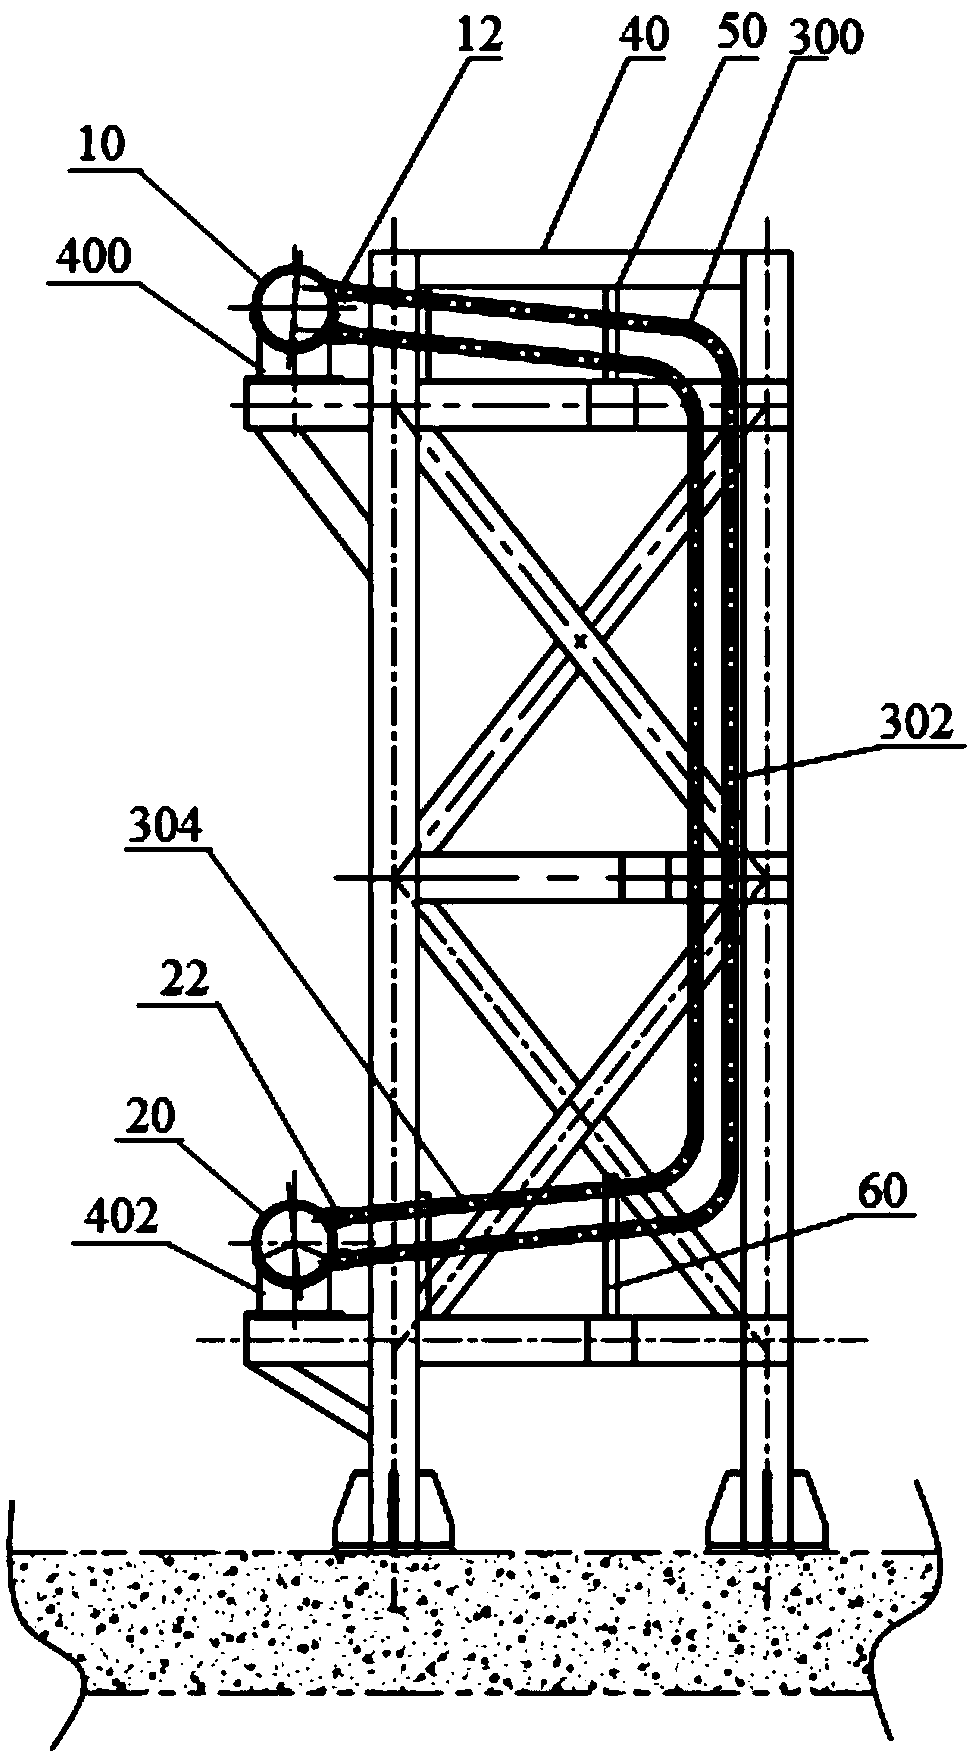 Passive condenser of nuclear power plant